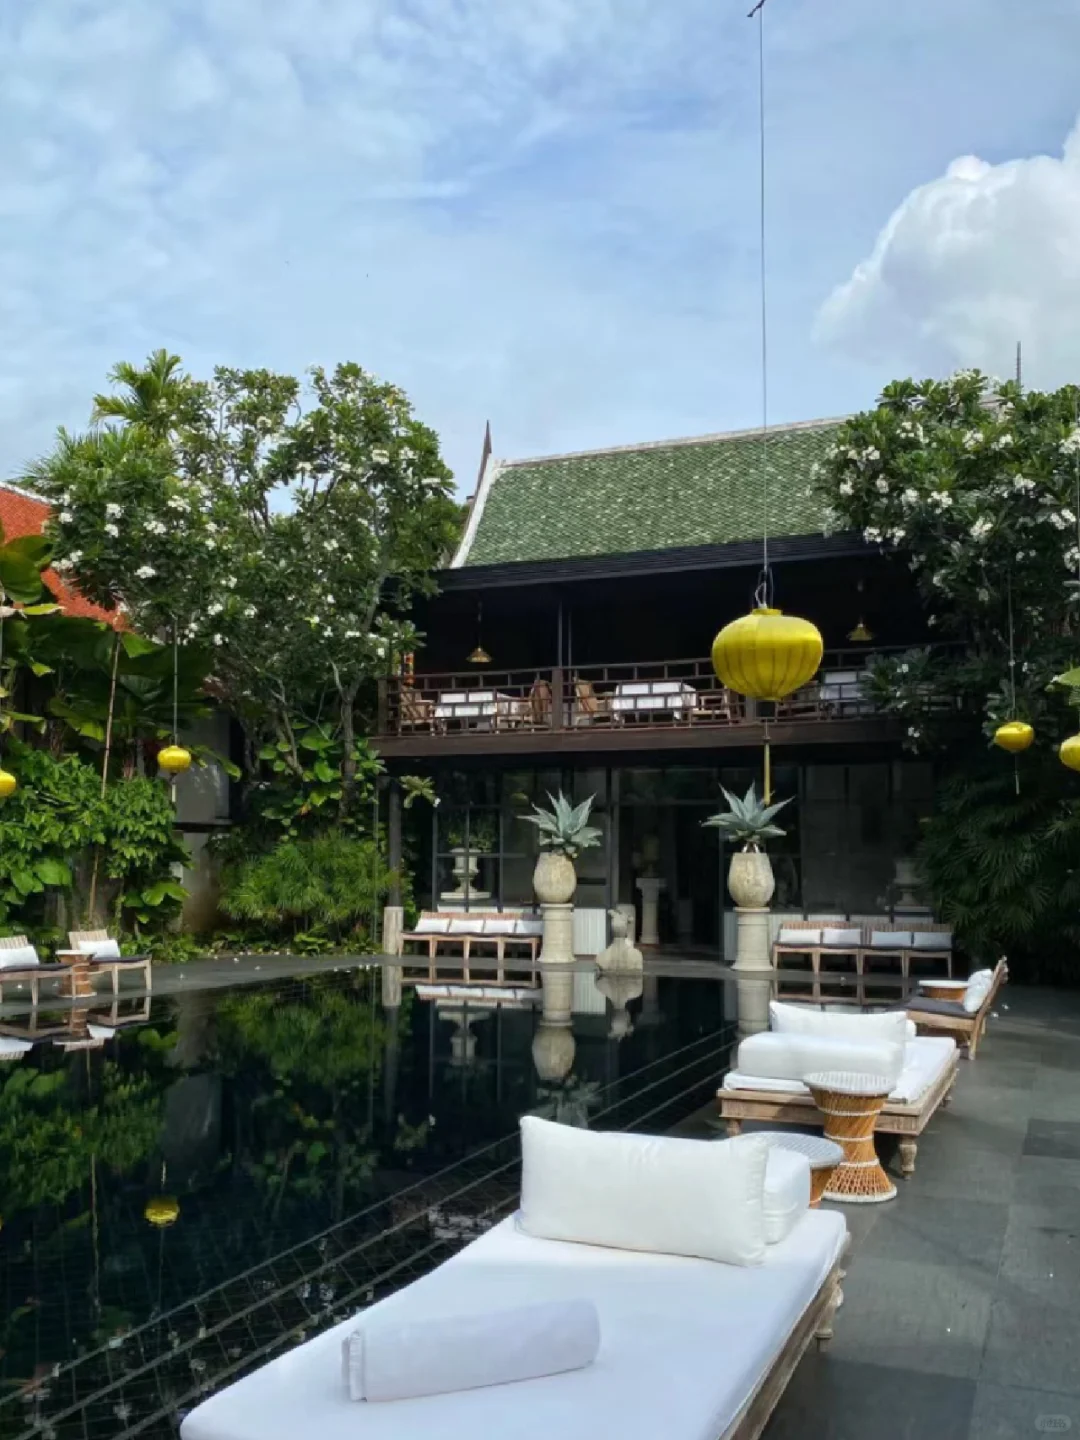 ChiangMai-Don’t stay in random hotels in Chiang Mai | The most complete guide to avoiding pitfalls